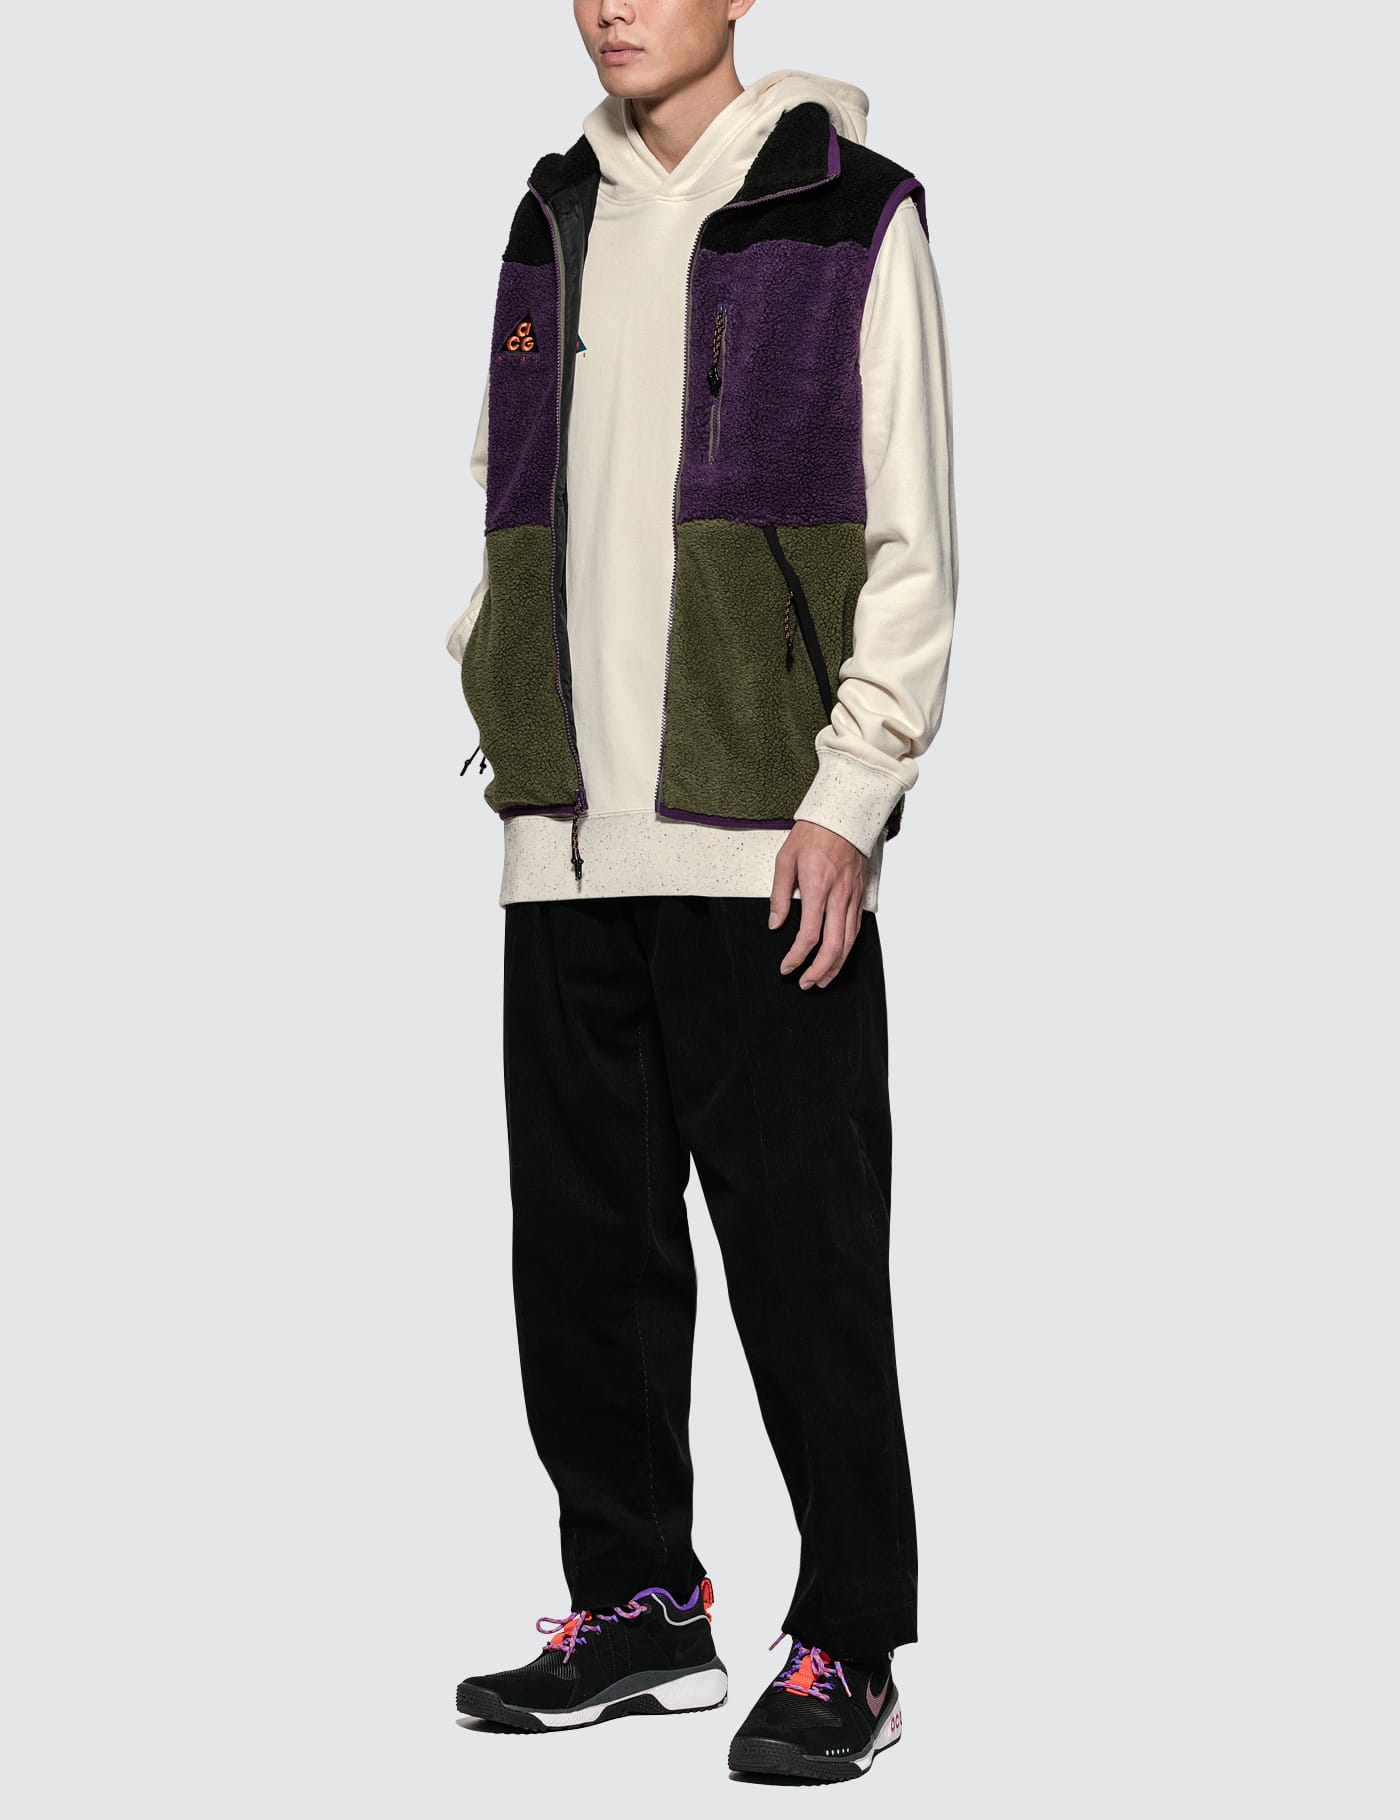 Nike - M Nsw Acg Vest | HBX - Globally Curated Fashion and